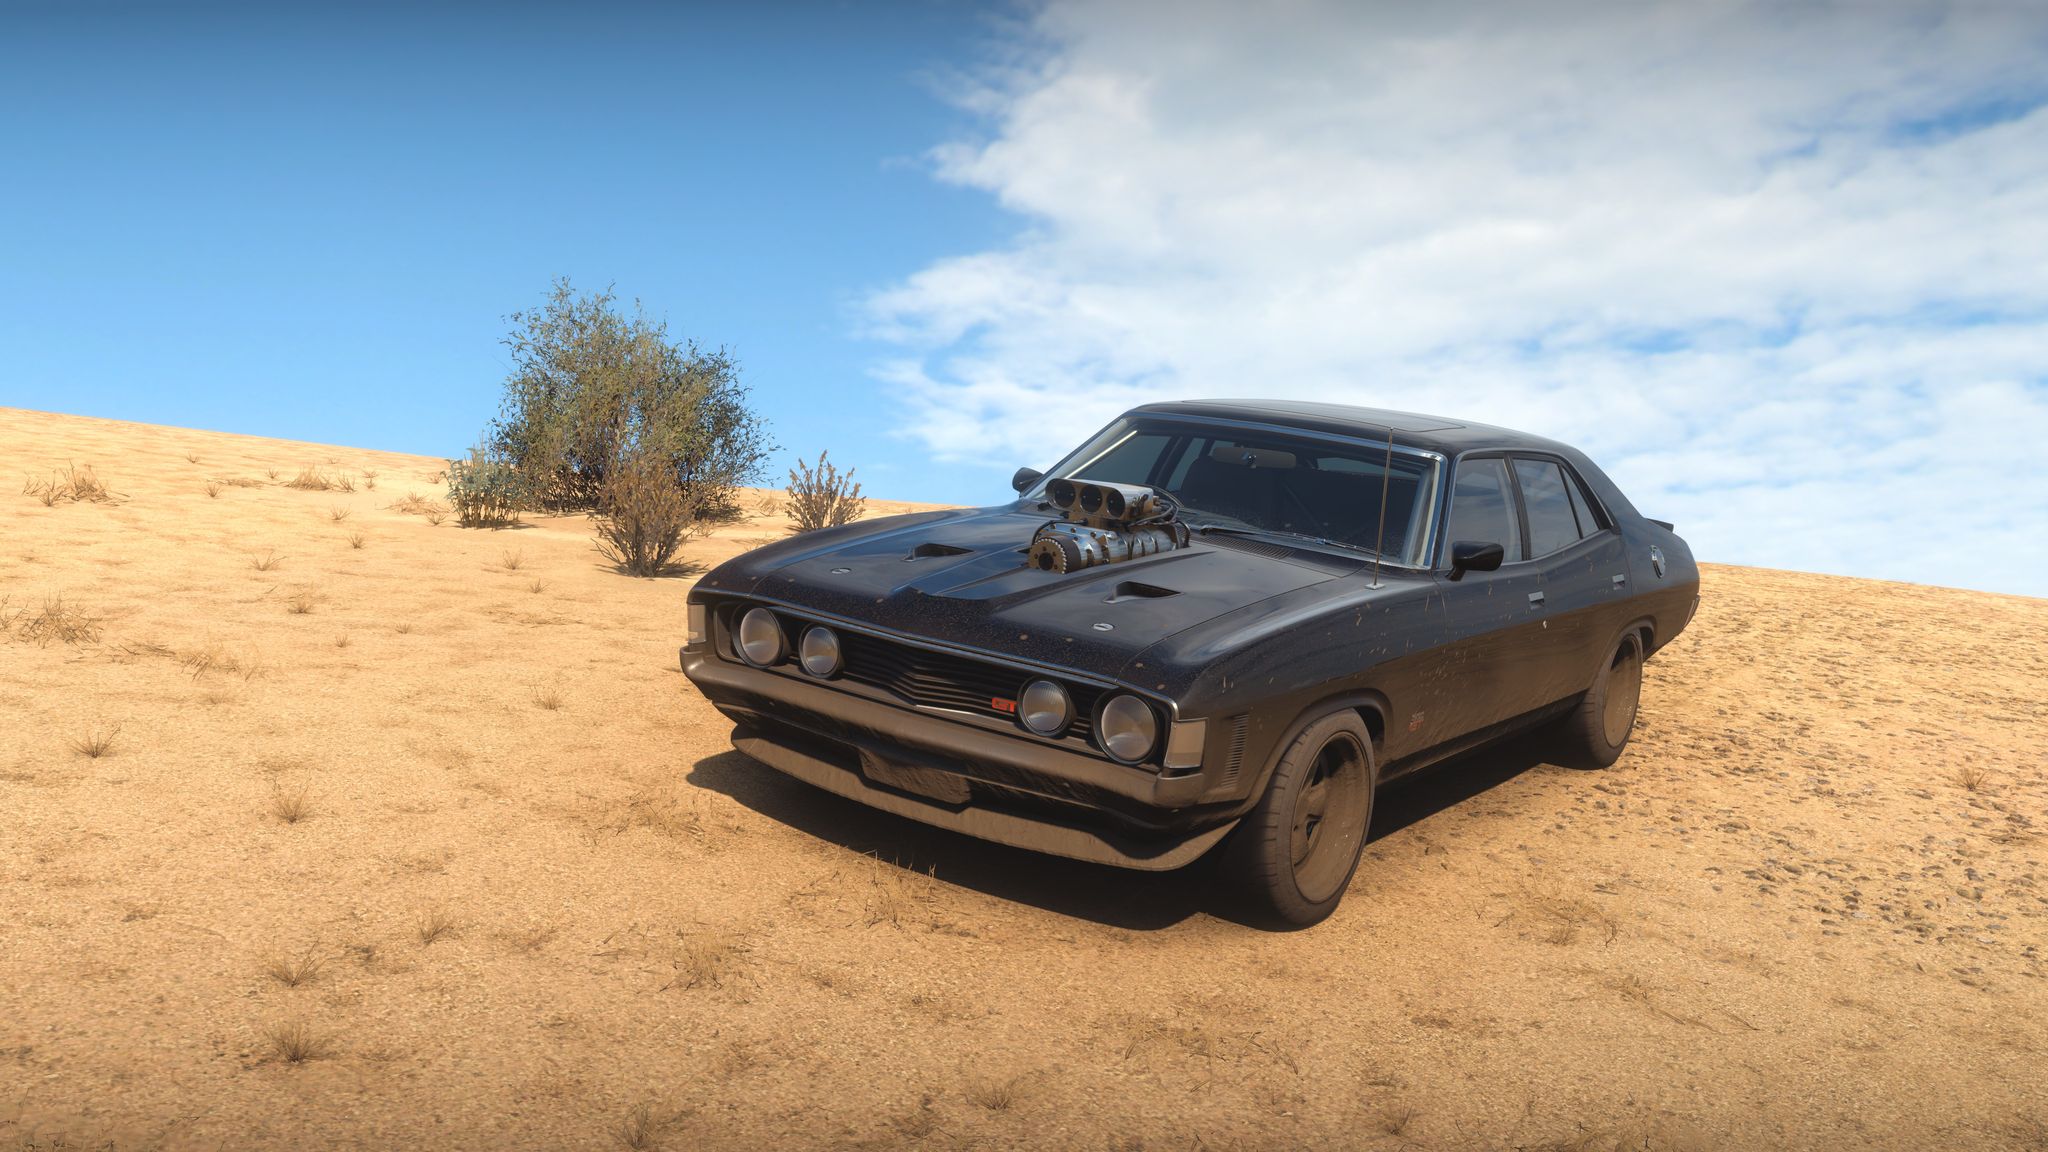 A screenshot from Forza Horizon 5 of a black 1972 Ford Falcon GT-HO muscle car with the engine poking out of the bonnet, looking like something directly from Mad Max. It's got mud spattered on the front and along the sides and is parked on a bleak-looking bit of sandy desert.